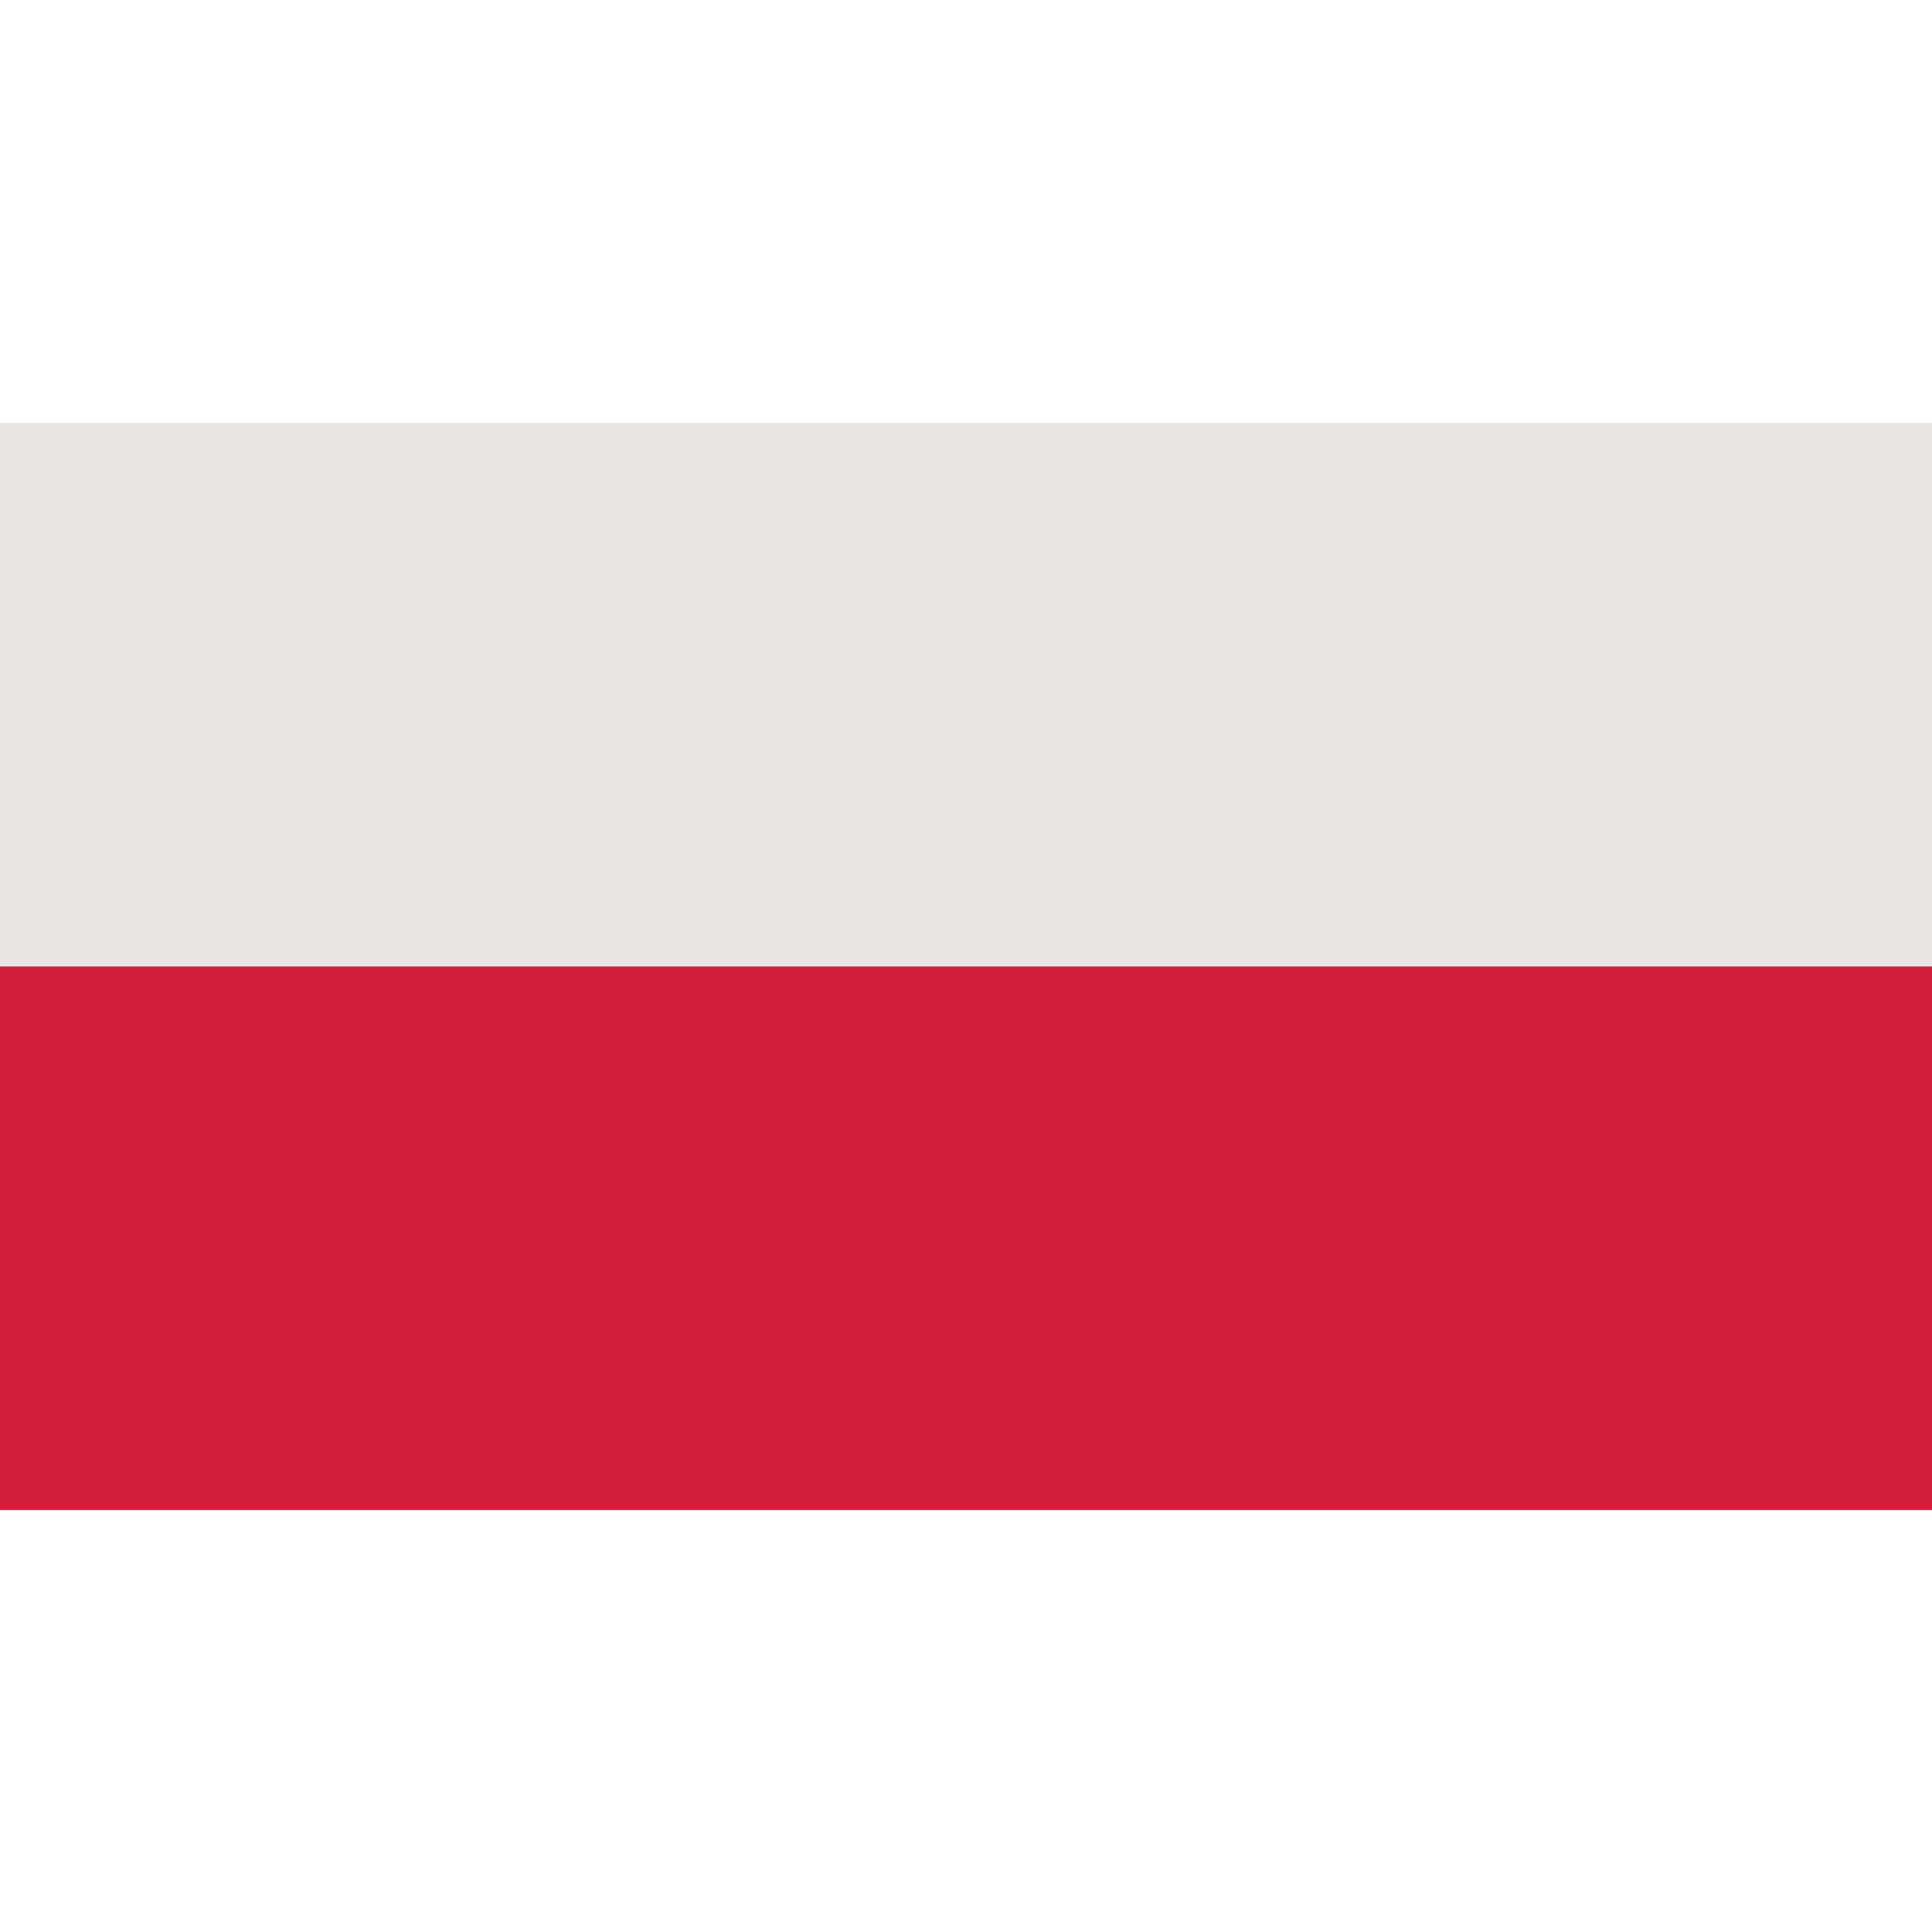 The flag of Poland is made up of two equal horizontal bands, the top half is white and the lower one is red.